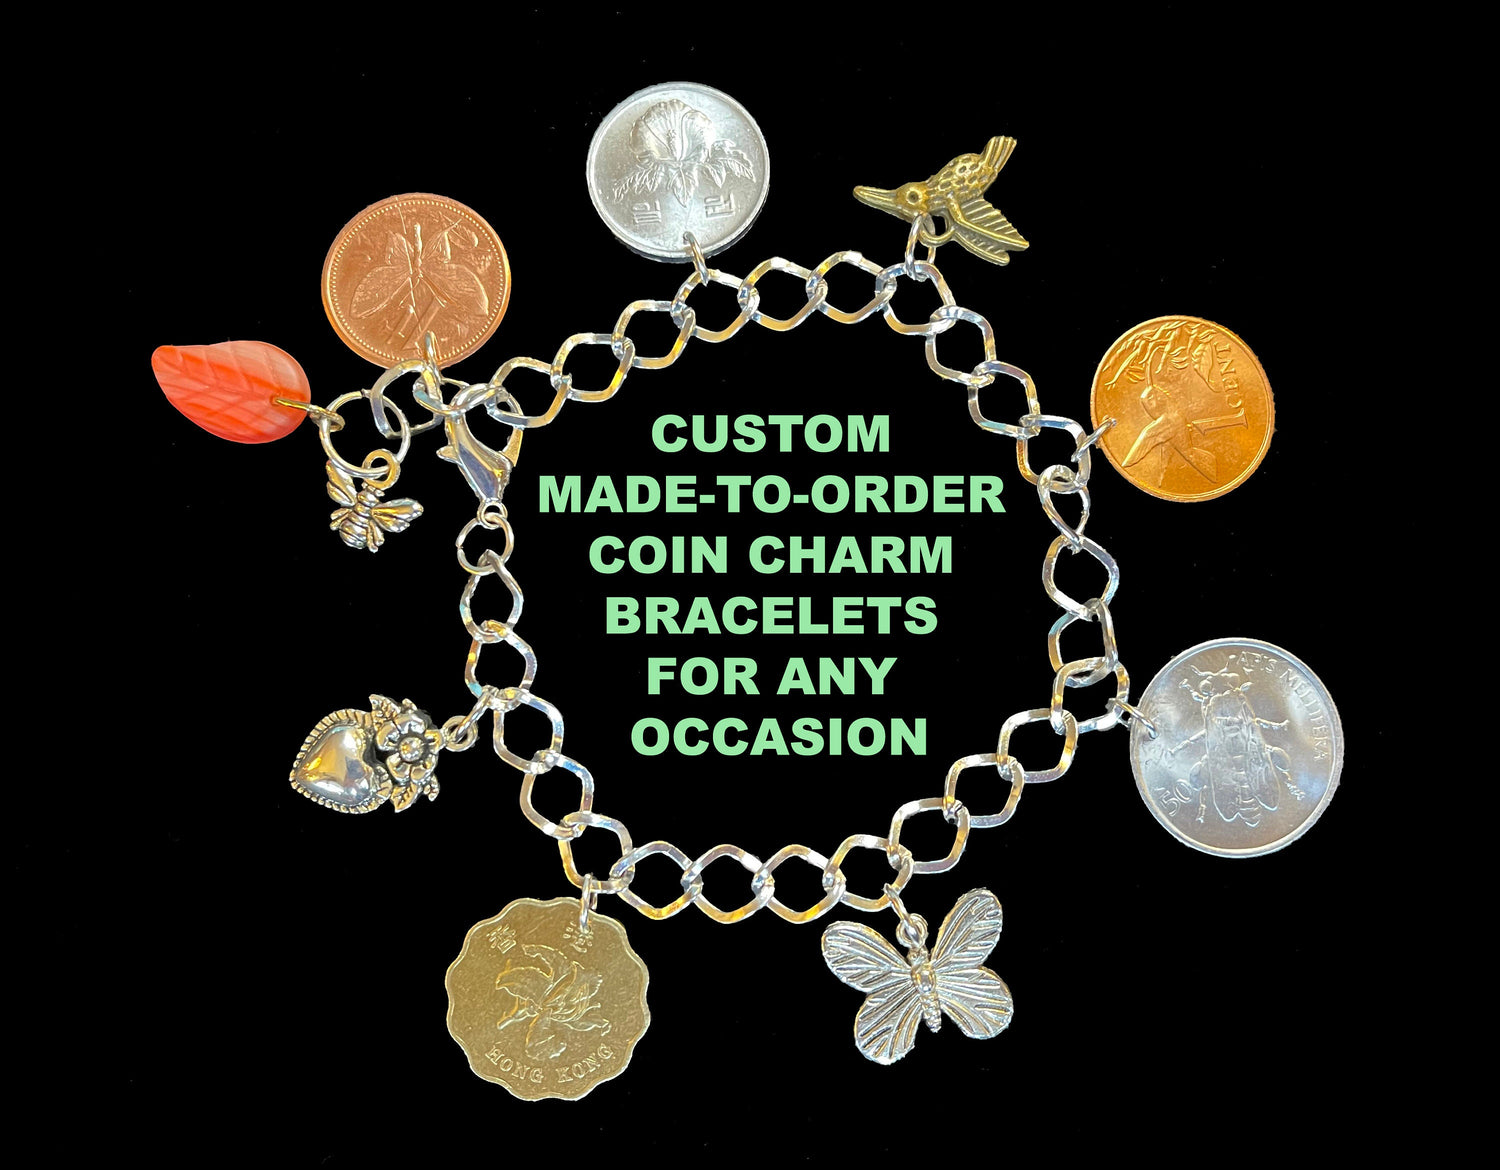 Silver plated adjustable coin charm bracelet w/ lobster clasp - design your own custom coin charm jewelry - made-to-order or kit + findings